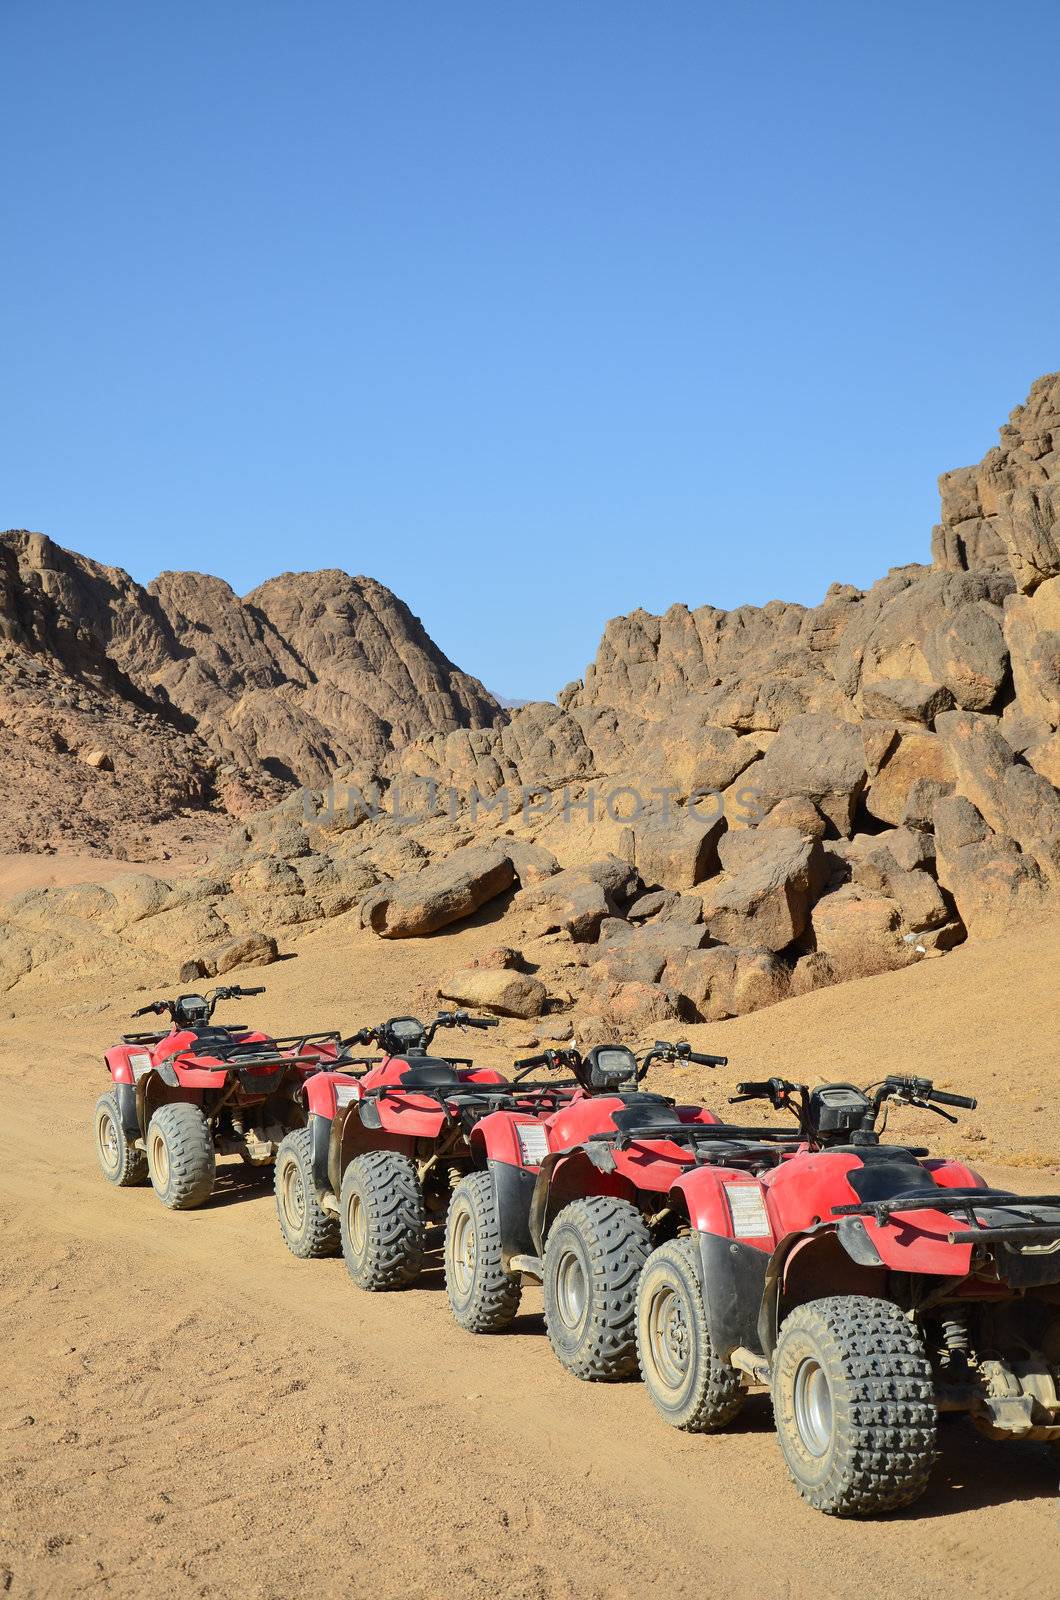 wheel of desert scooter arranged in a row